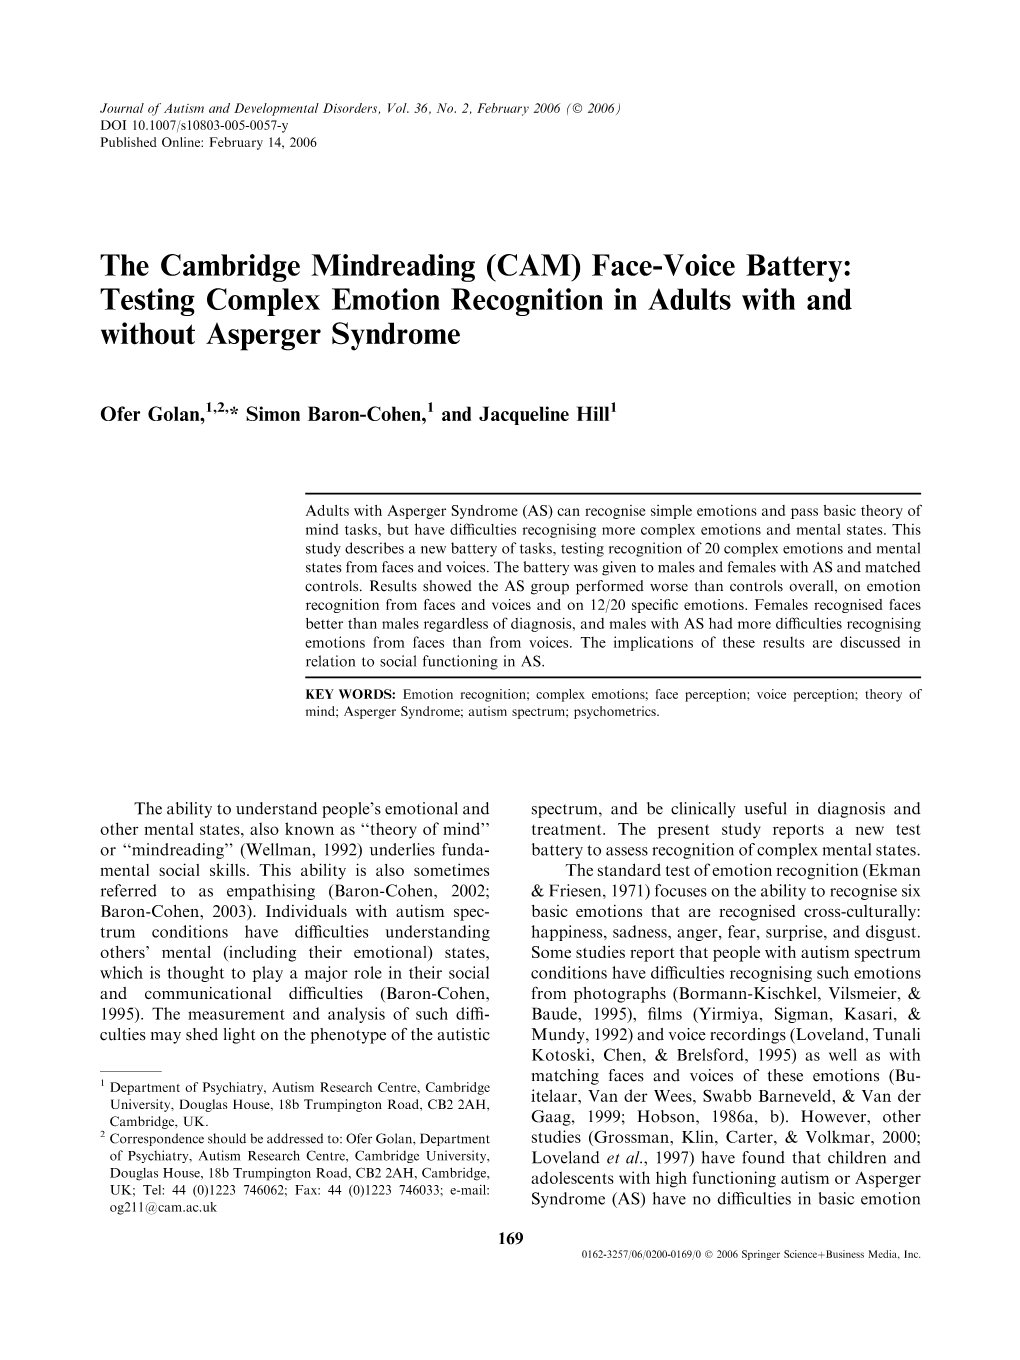 The Cambridge Mindreading (CAM) Face-Voice Battery: Testing Complex Emotion Recognition in Adults with and Without Asperger Syndrome